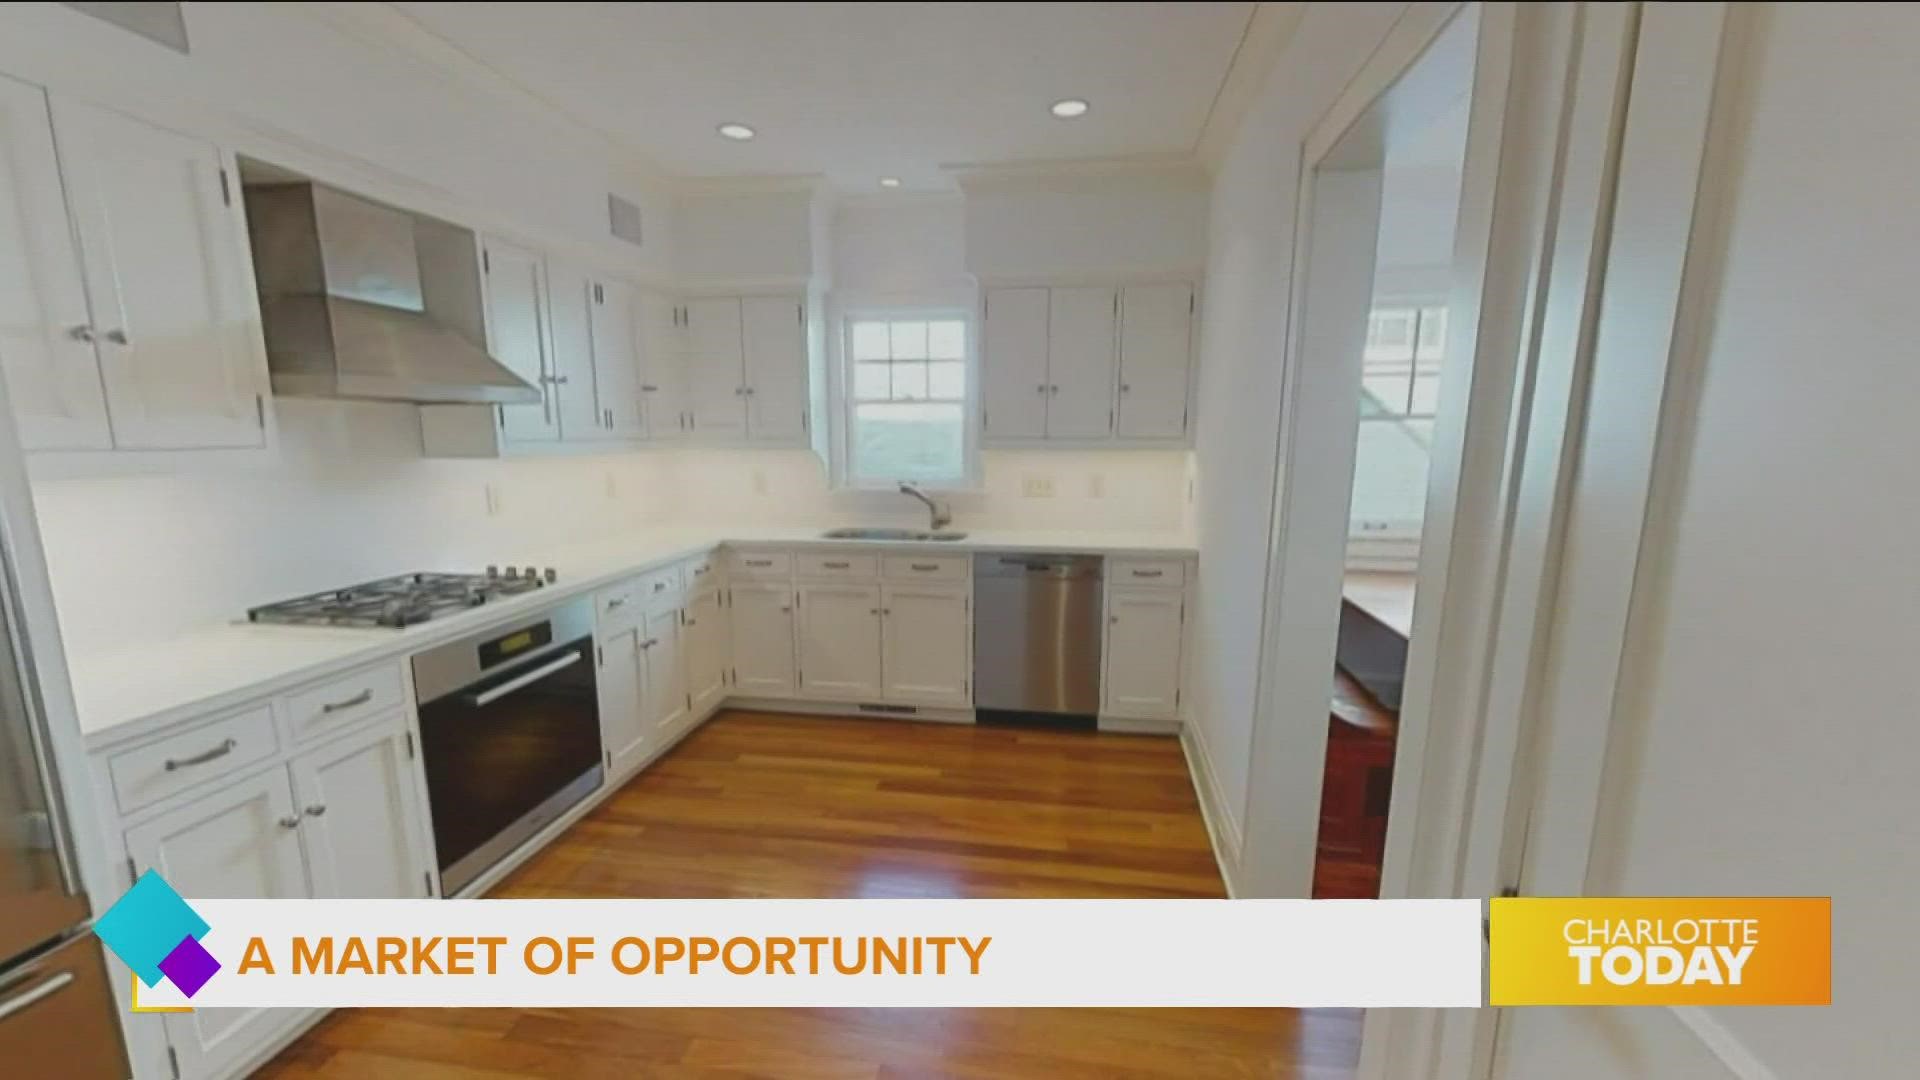 A market of opportunity is still available in the Carolinas